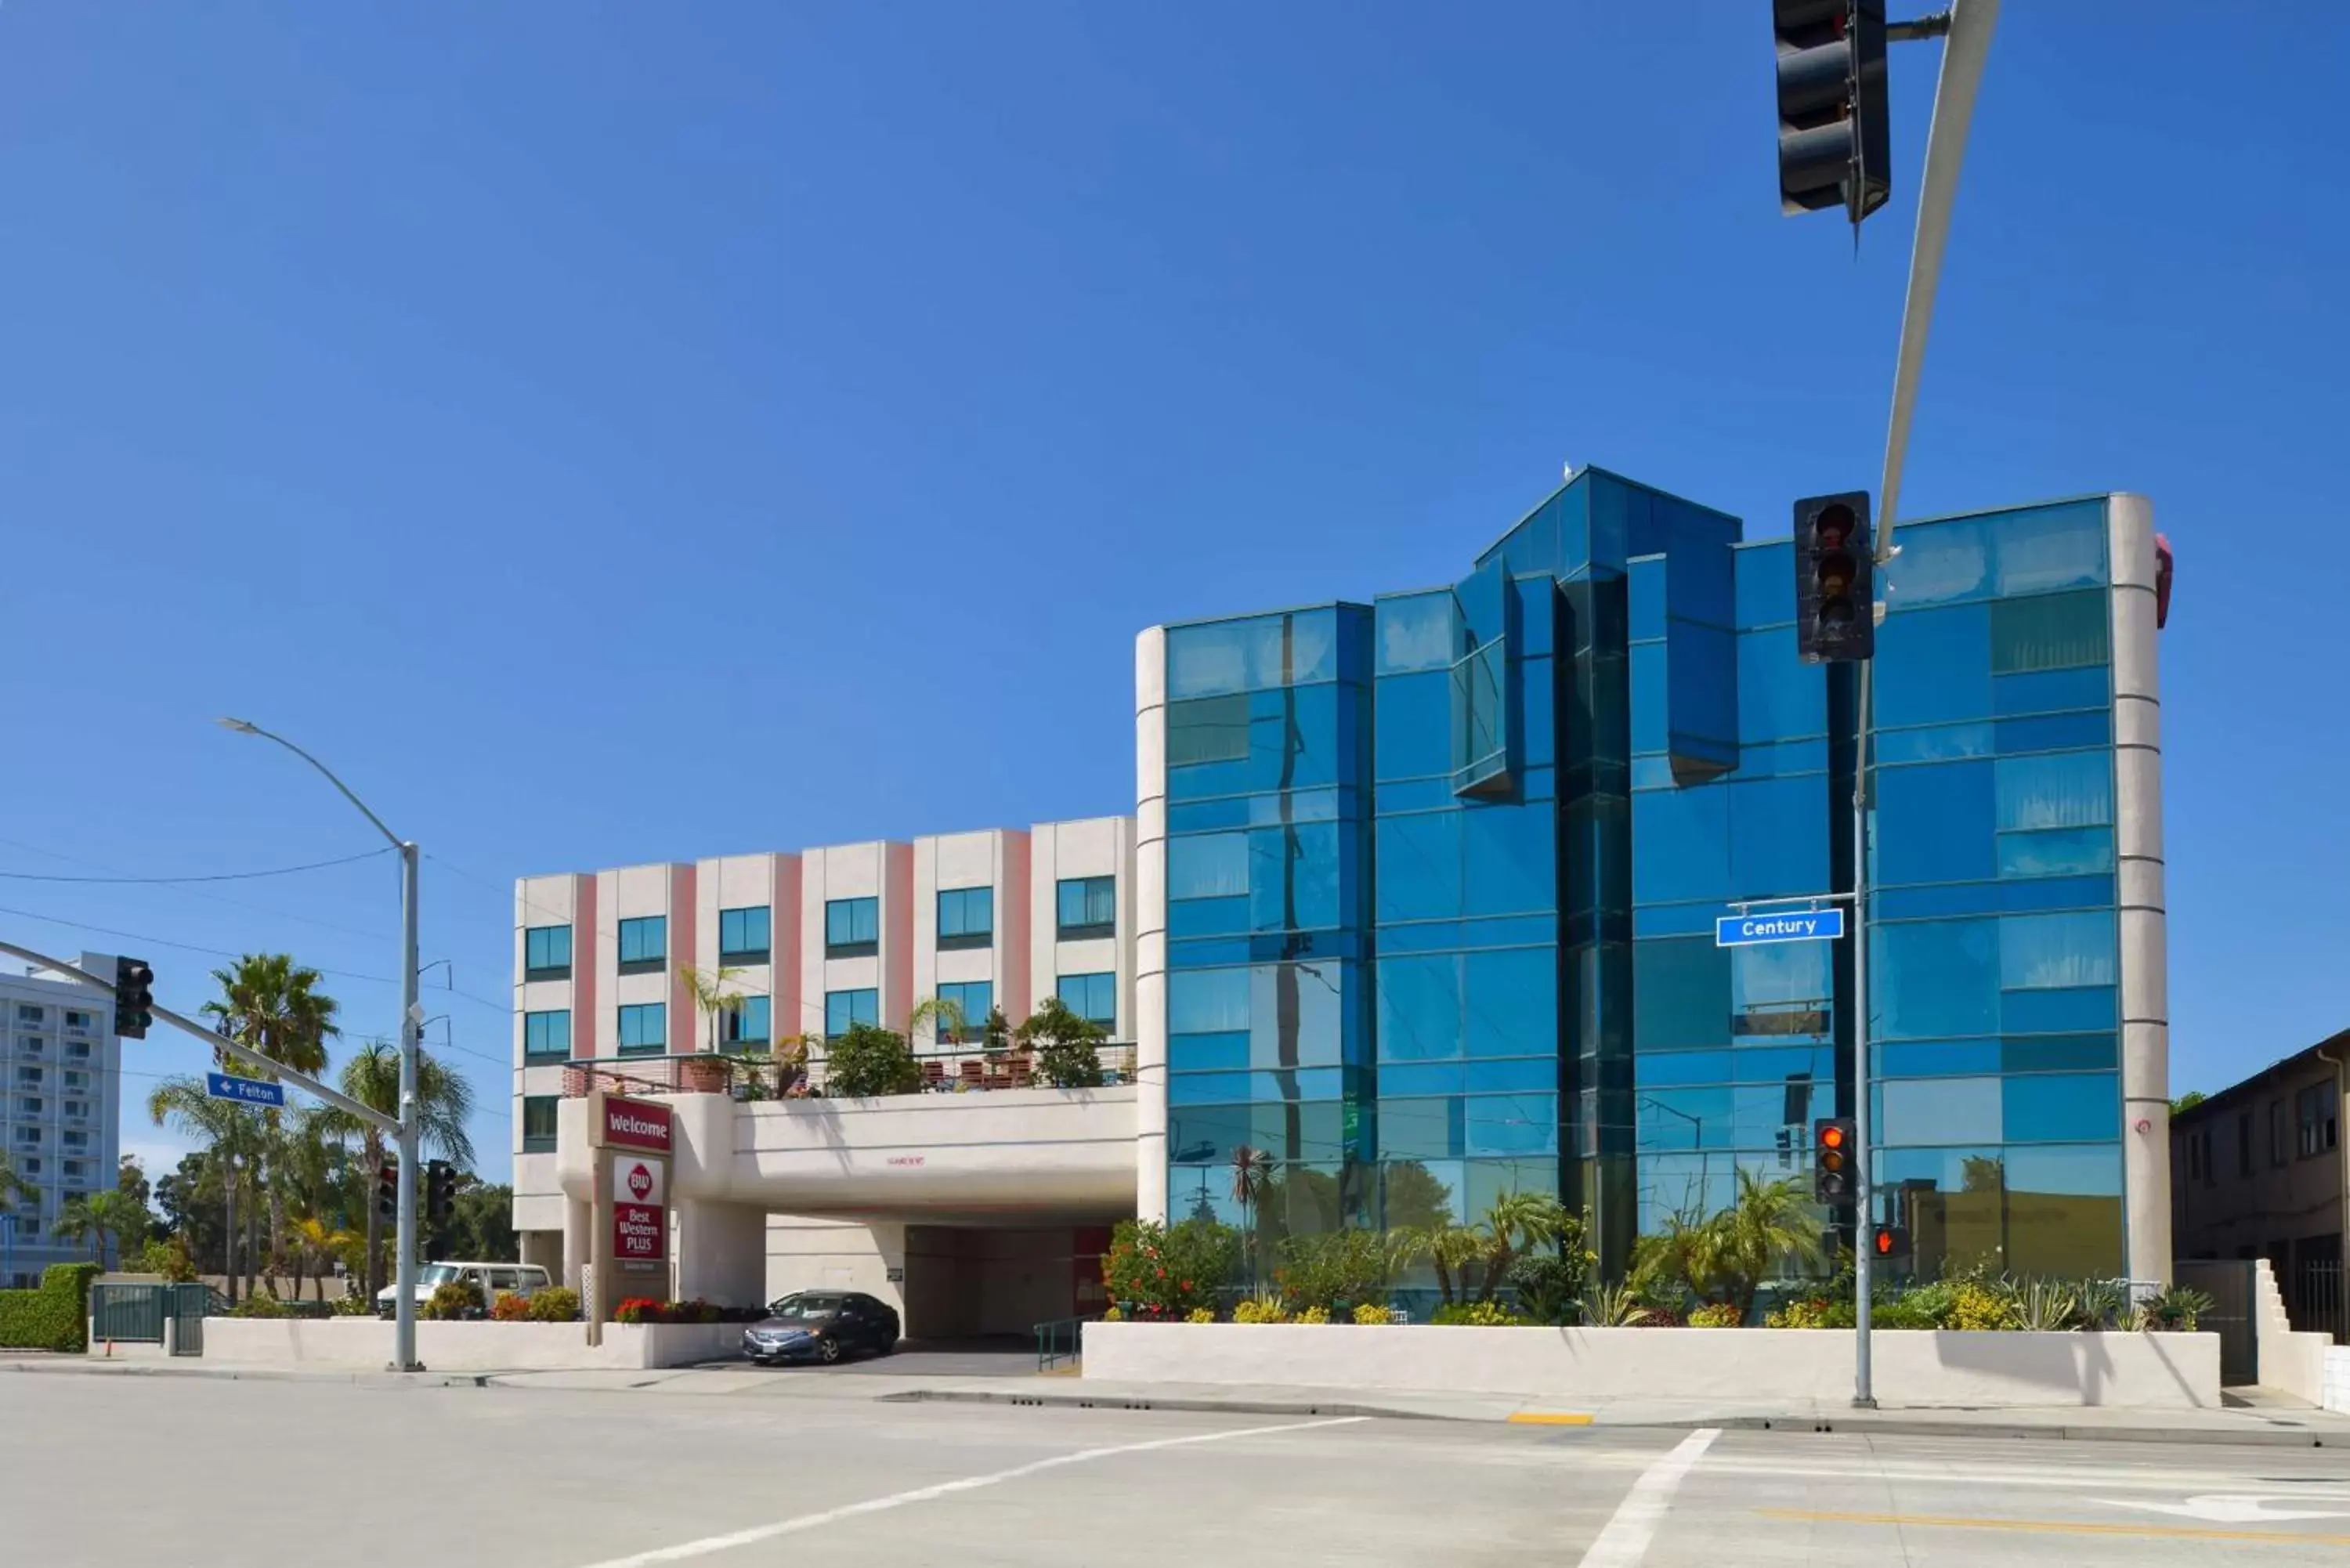 Property Building in Best Western Plus Suites Hotel - Los Angeles LAX Airport